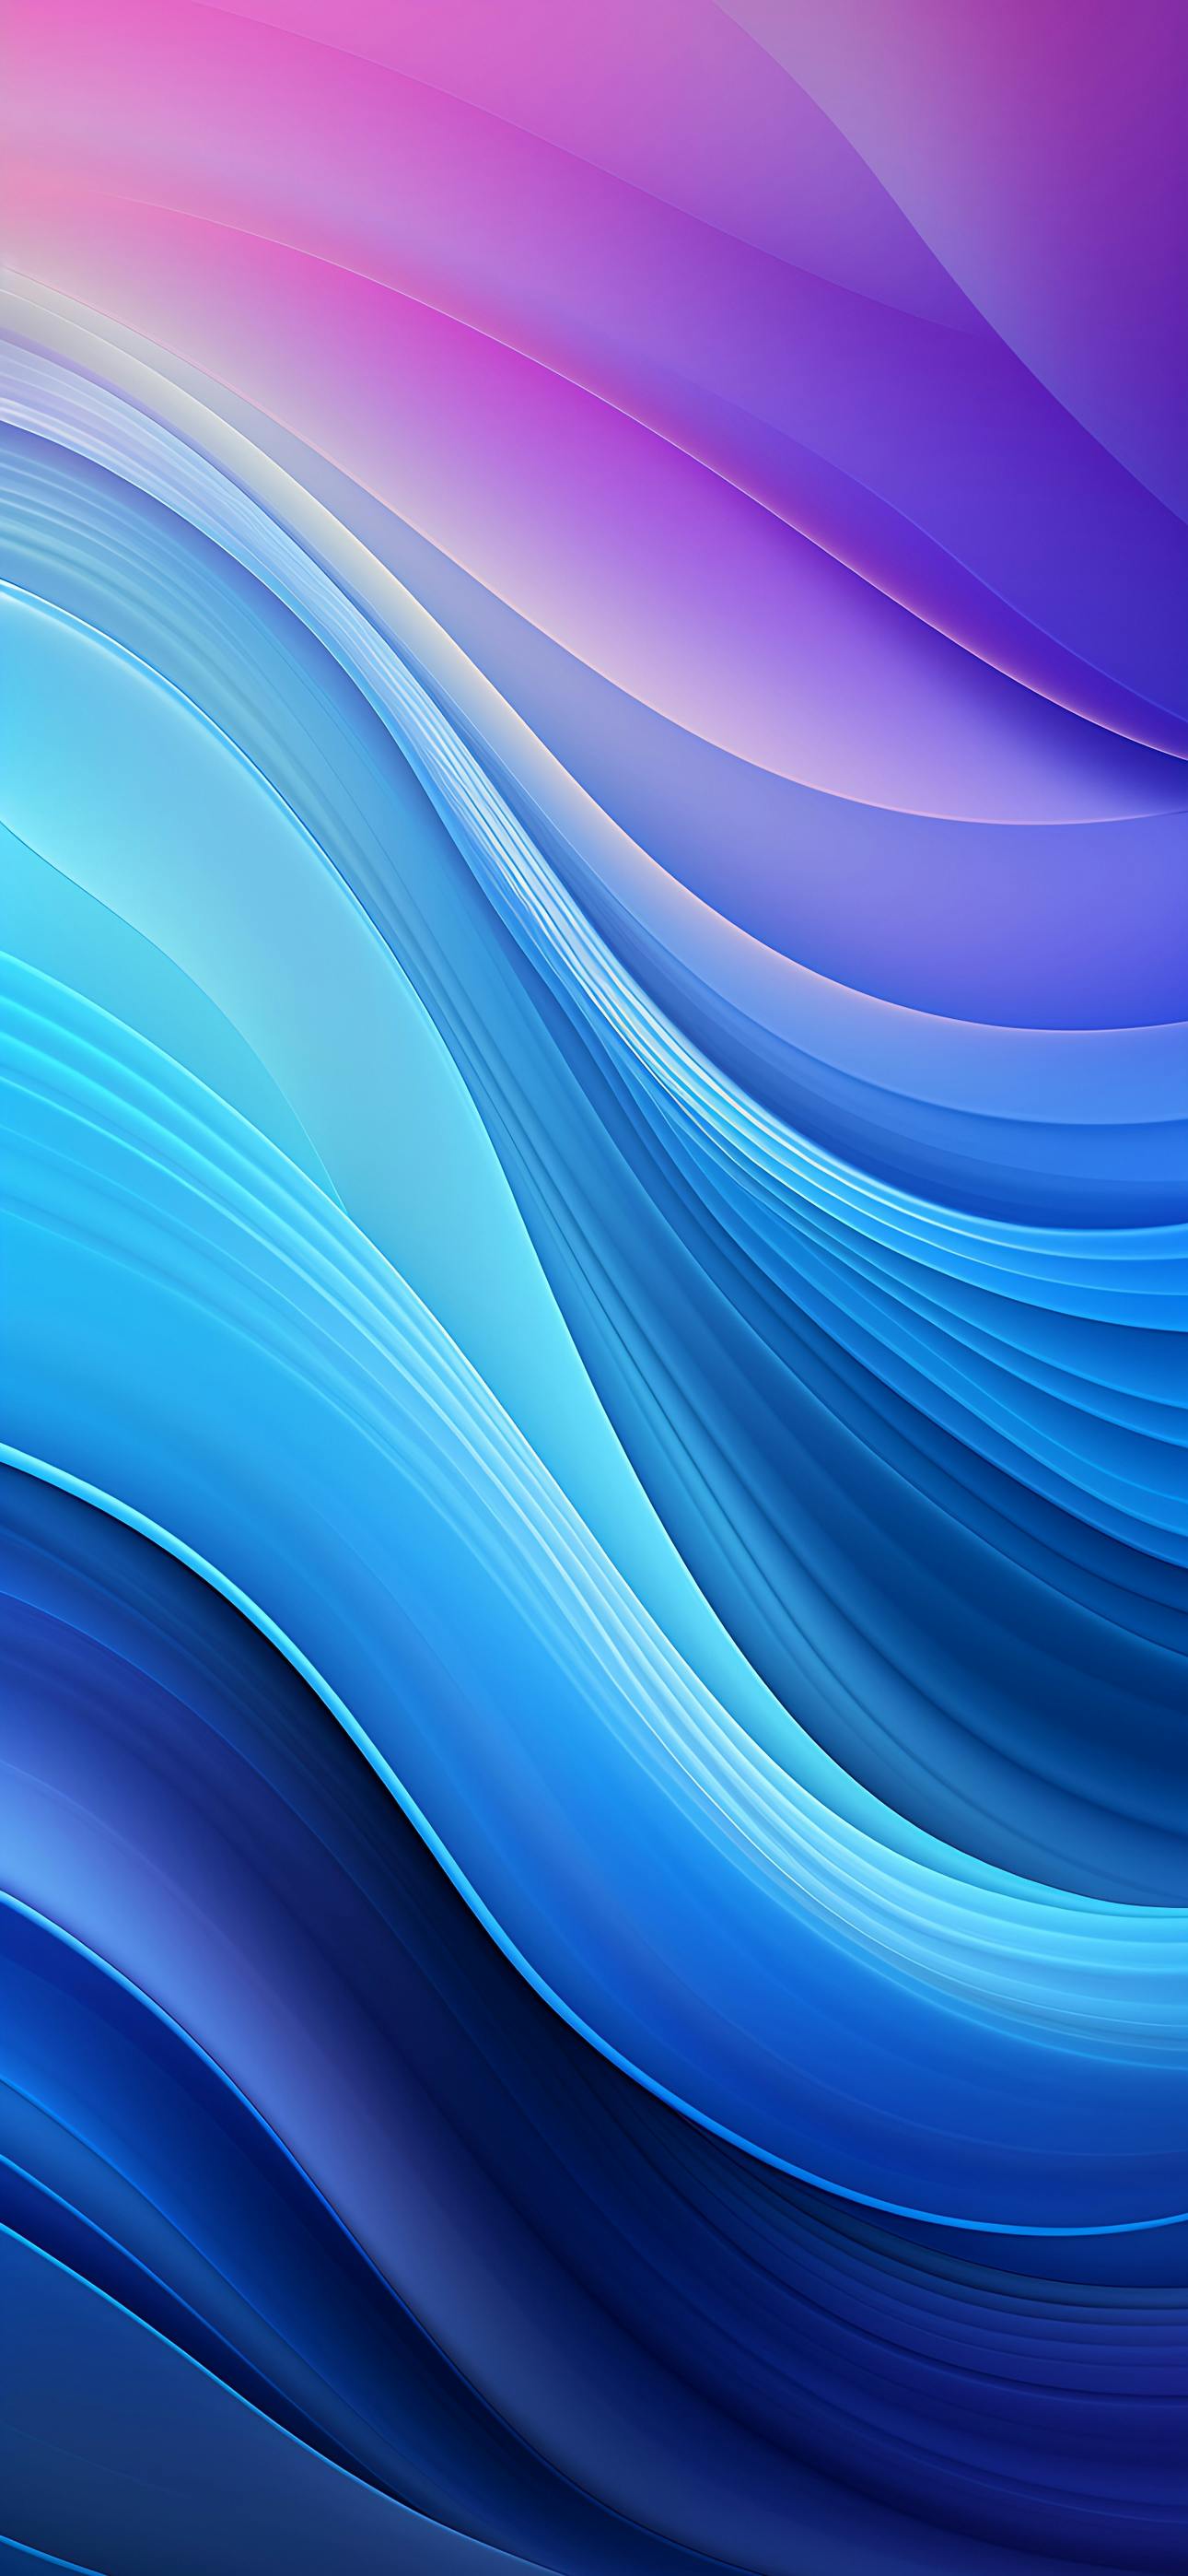 Cool blue gradient wallpaper for iPhone